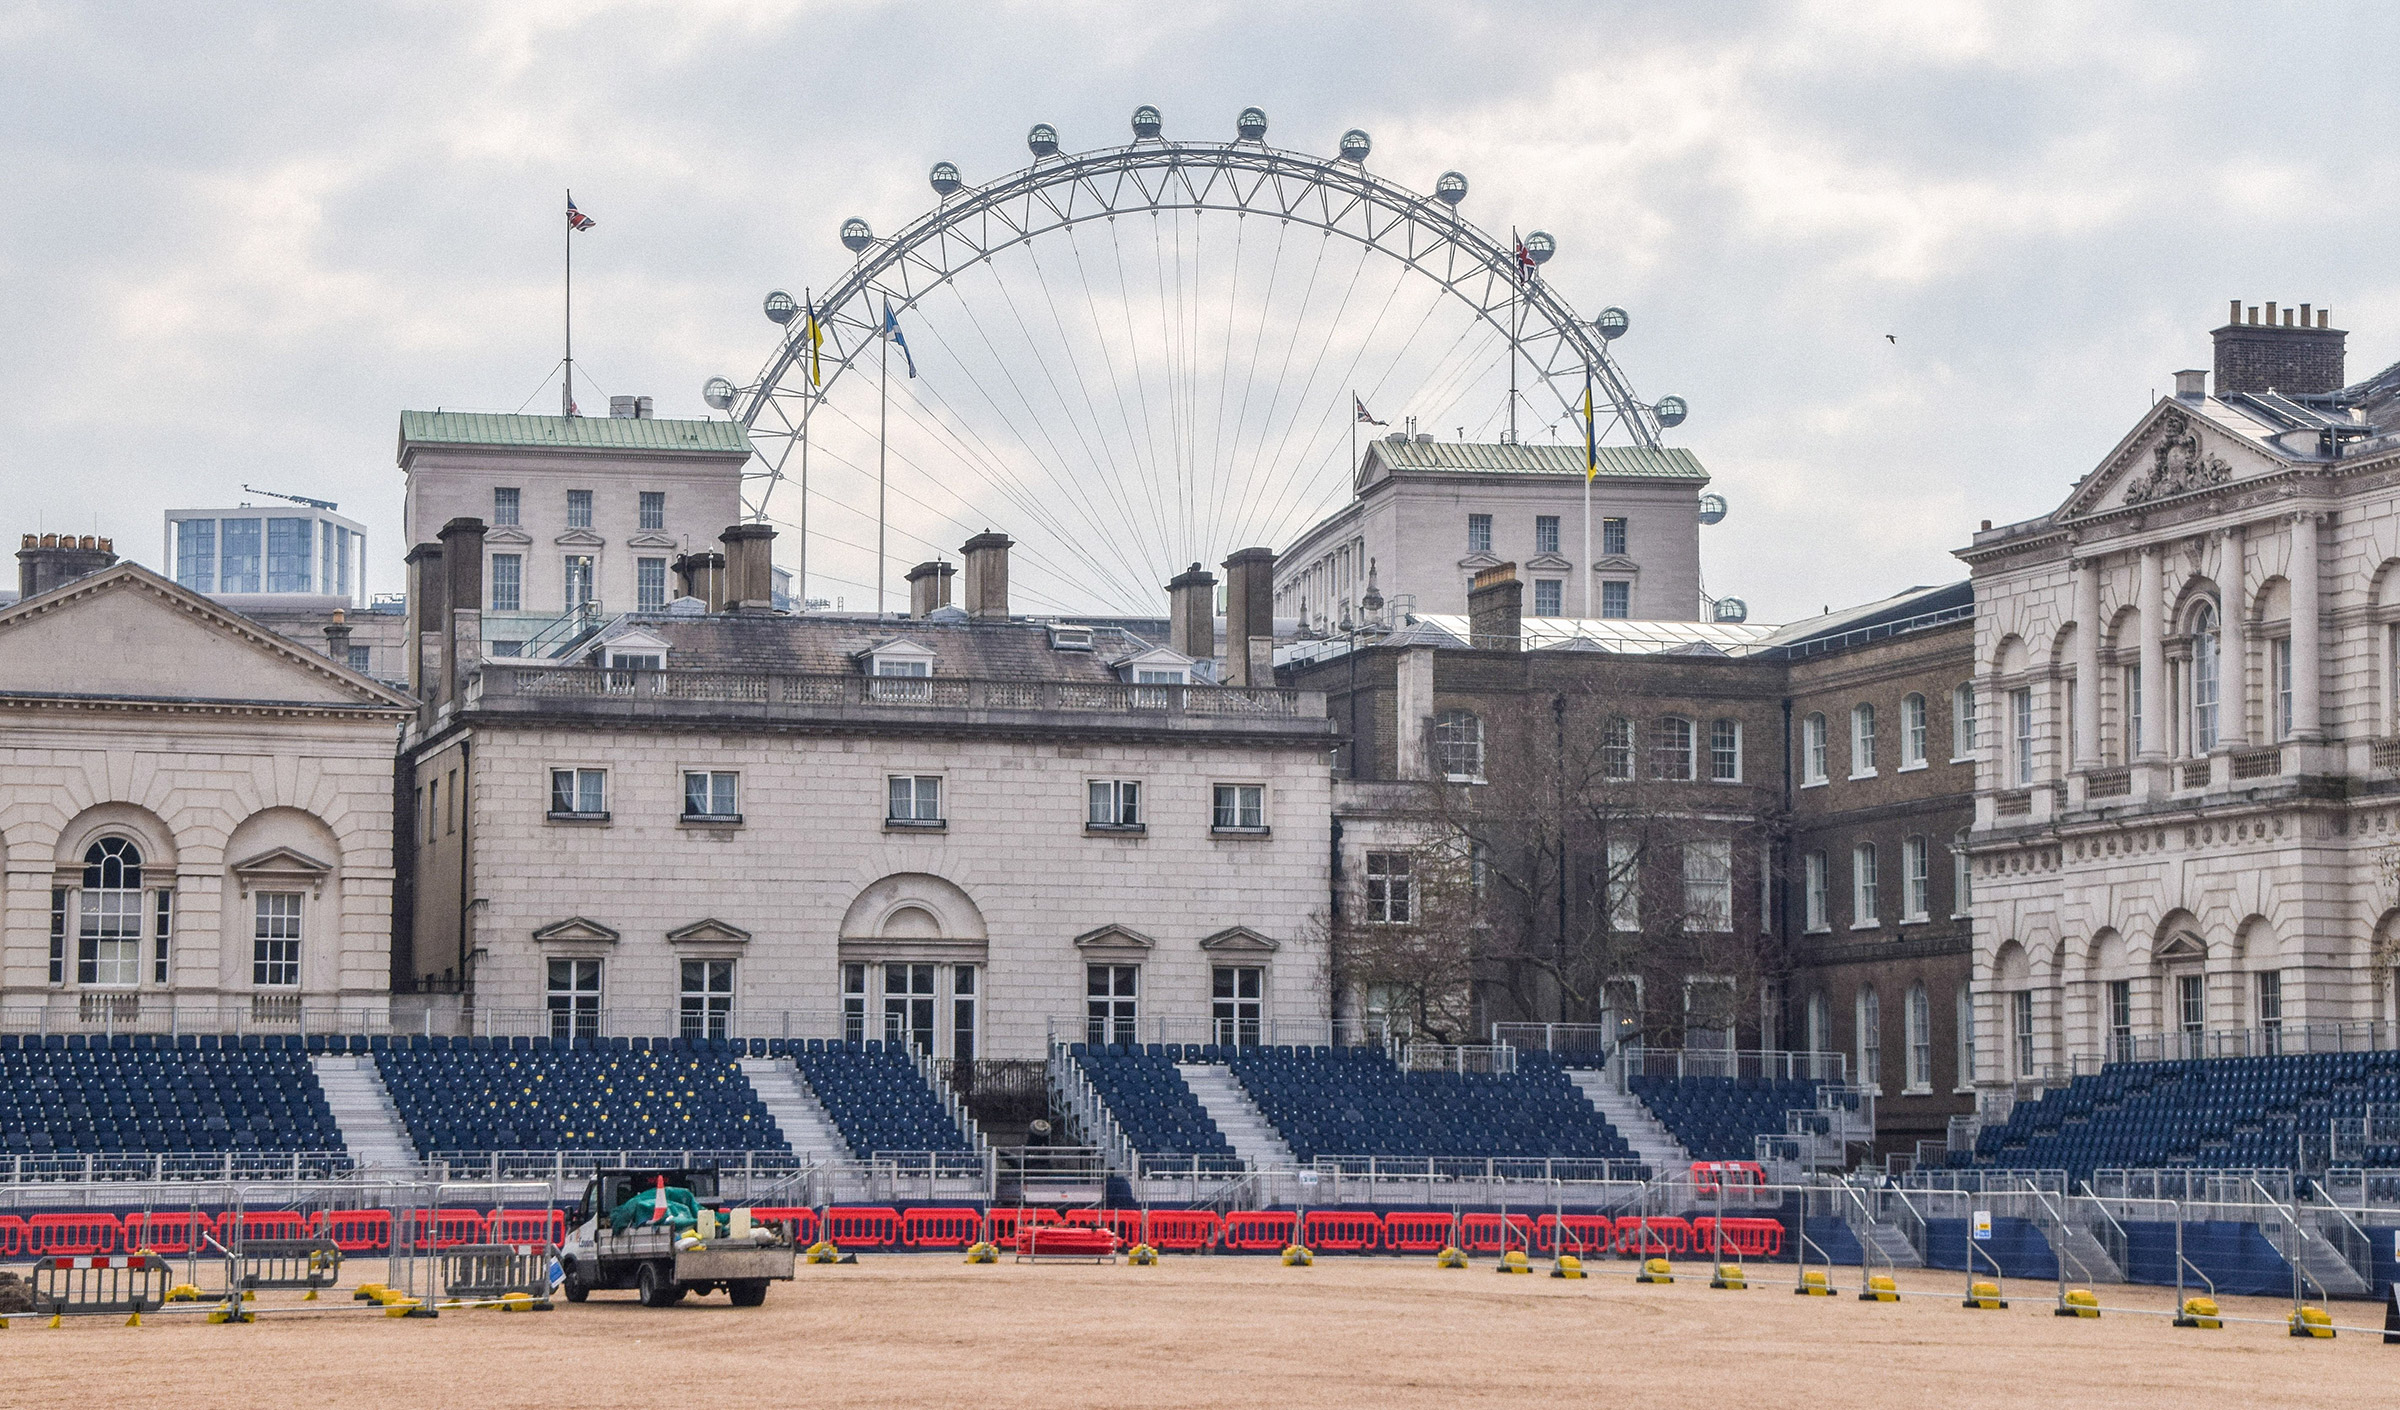 Workers install seats at Horse Guards Parade on April 17. (Vuk Valcic—SOPA Images/Shutterstock)